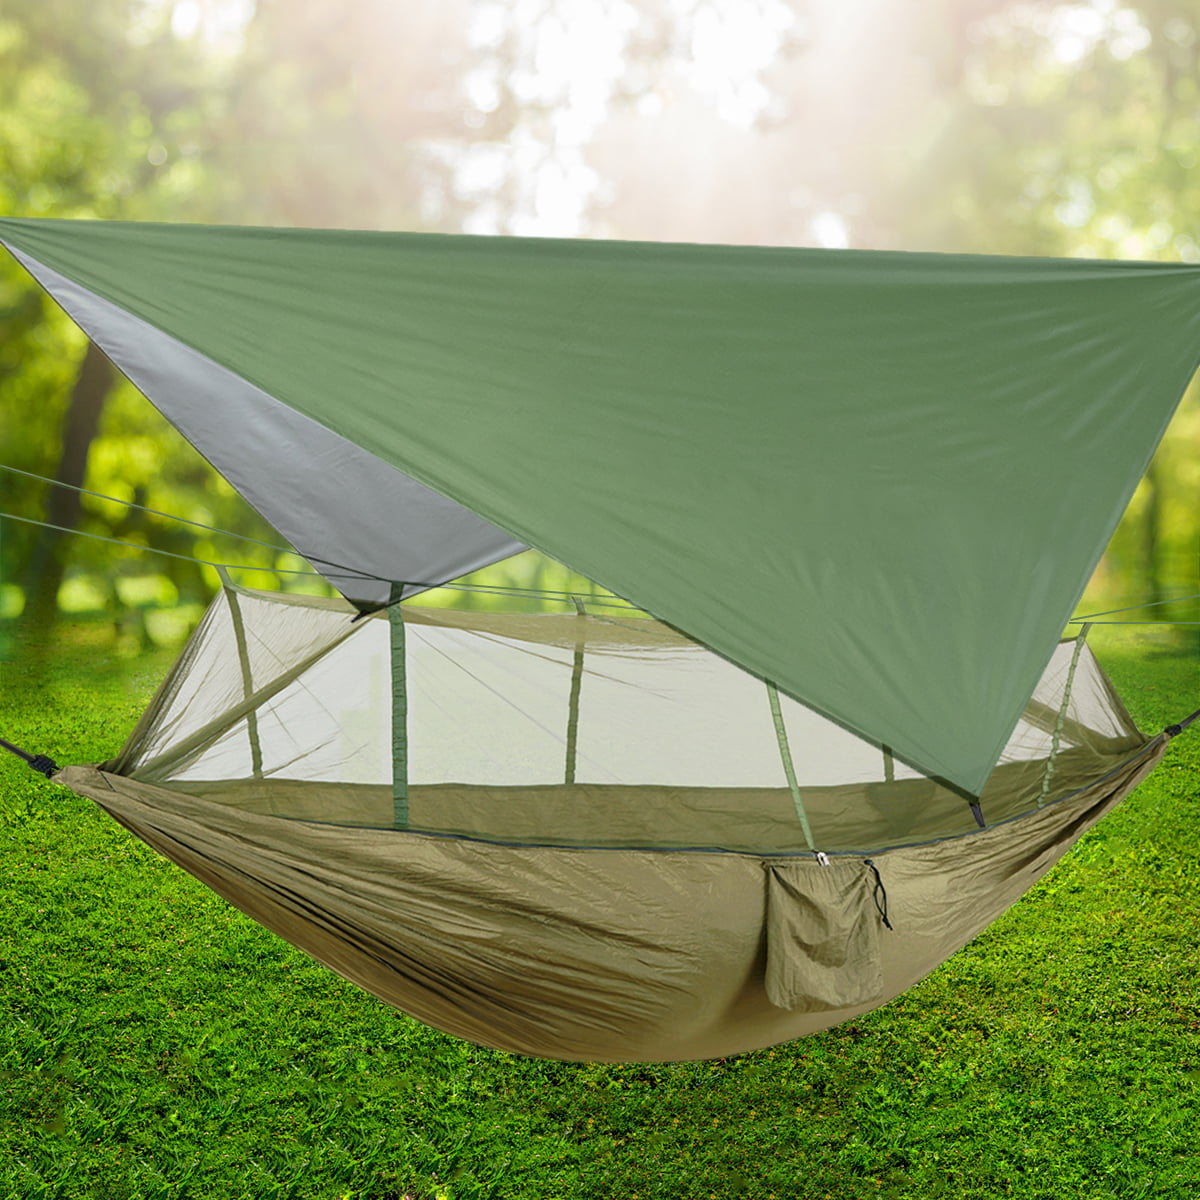 Night Cat Camping Hammock Tent with Mosquito Net and Rain Fly for One Person Waterproof Breathable Portable for Hiking Fishing Outdoors Garden 